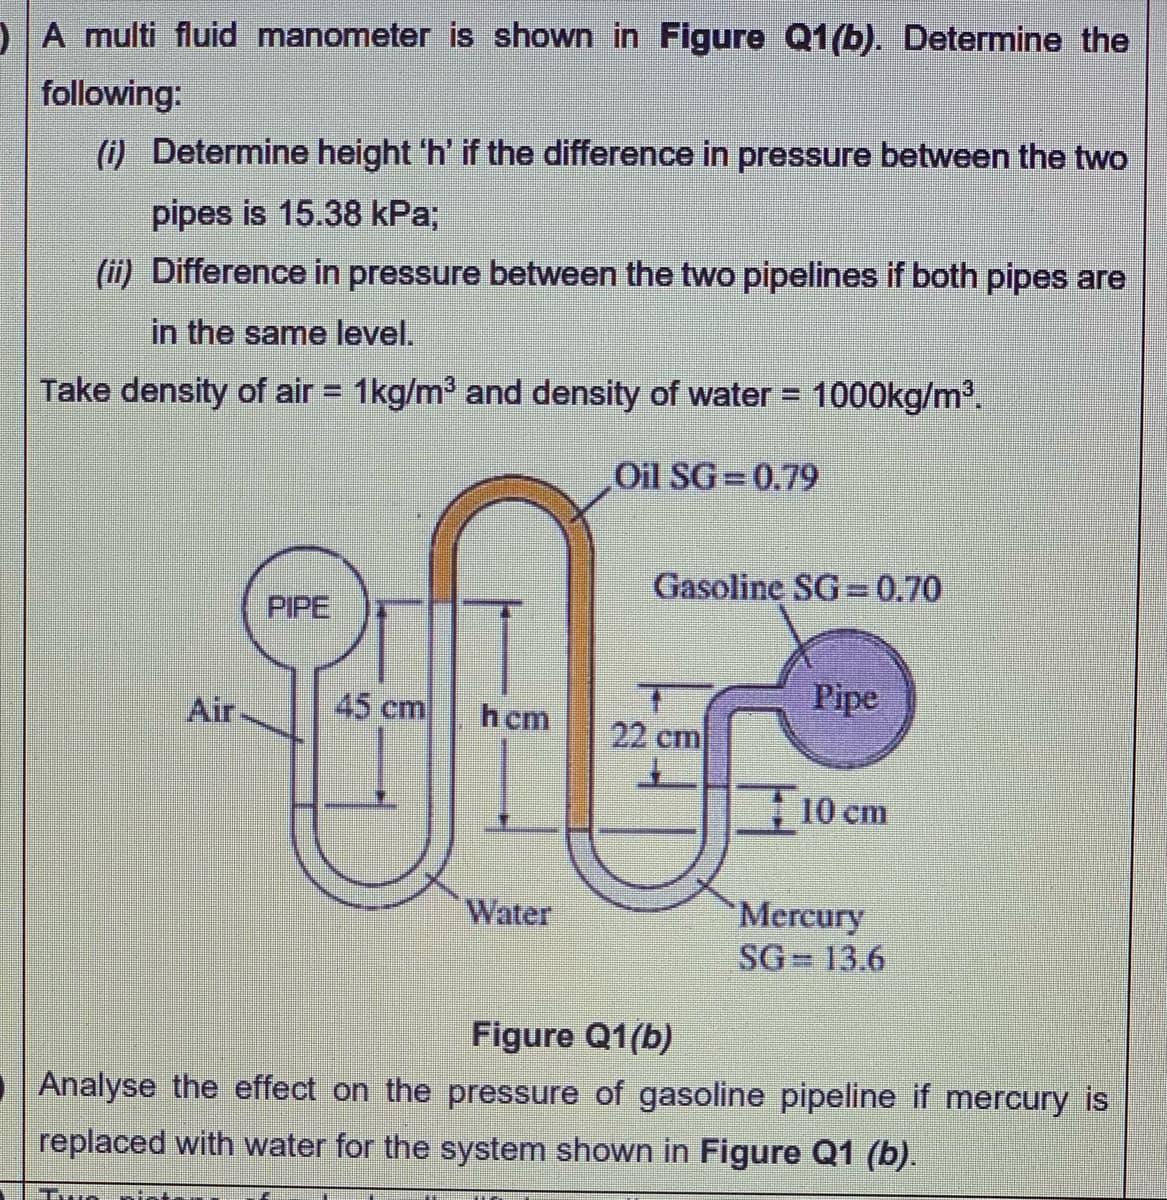 DA multi fluid manometer is shown in Figure Q1(b). Determine the
following:
(i) Determine height 'h' if the difference in pressure between the two
pipes is 15.38 kPa;
(ii) Difference in pressure between the two pipelines if both pipes are
in the same level.
Take density of air =
1kg/m3 and density of water = 1000kg/m³.
%3D
Oil SG 0.79
Gasoline SG =0.70
PIPE
Air.
45 cm
h cm
Pipe
22 cm
10 cm
Water
`Mercury
SG 13.6
Figure Q1(b)
Analyse the effect on the pressure of gasoline pipeline if mercury is
replaced with water for the system shown in Figure Q1 (b).
